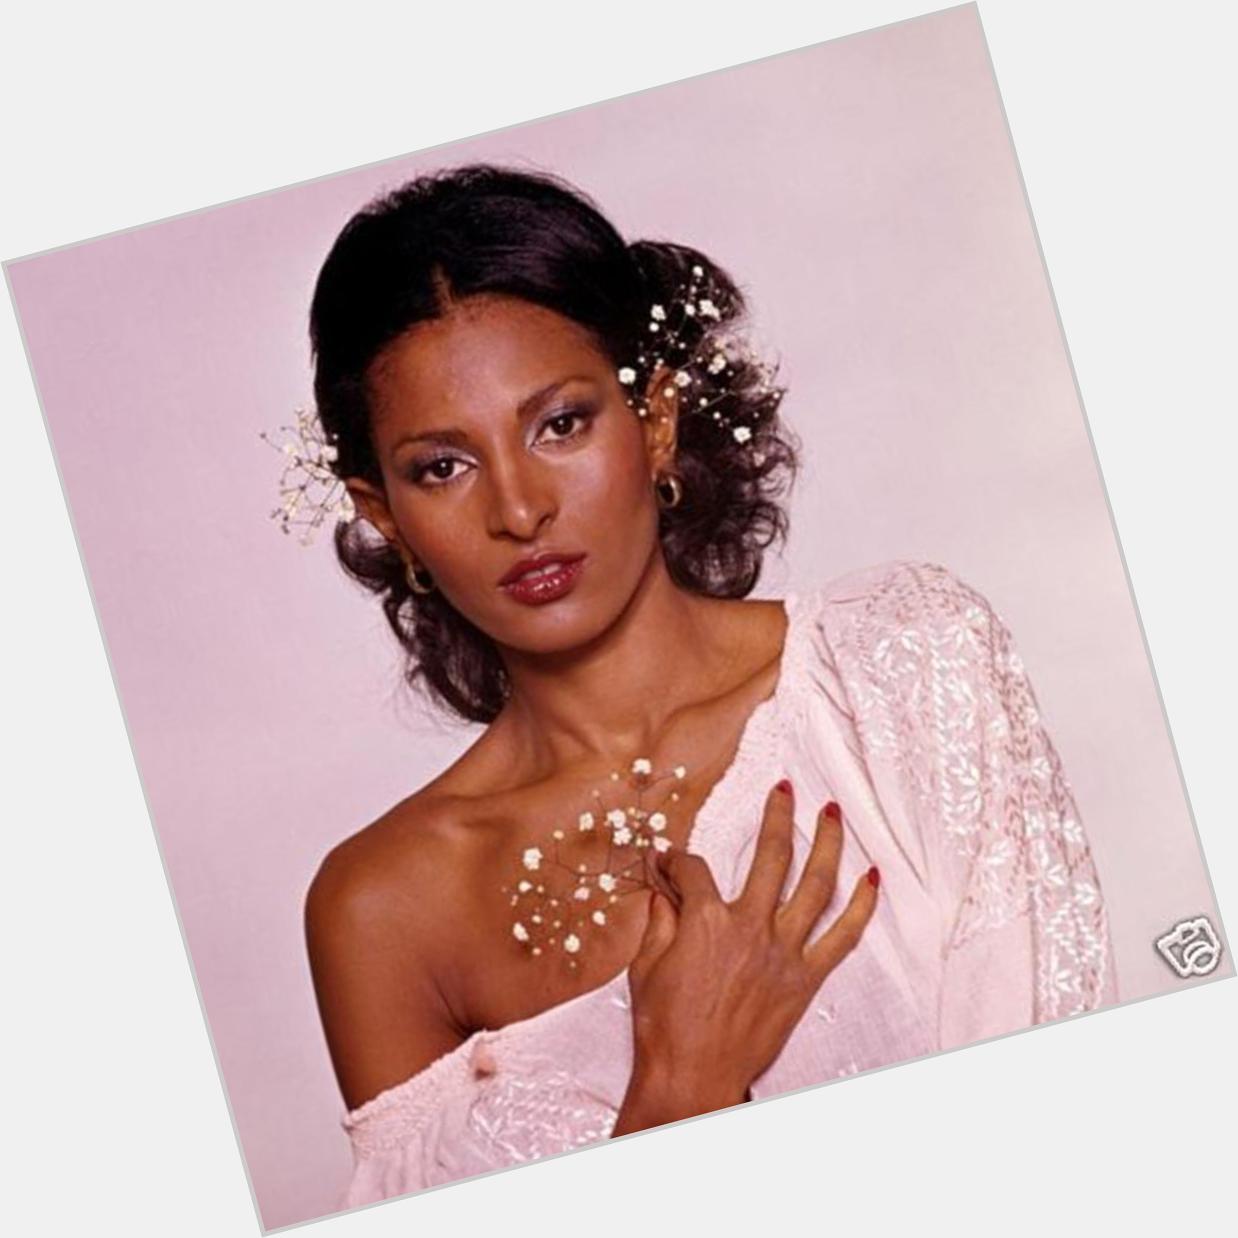 HAPPY BIRTHDAY PAM GRIER (05.26.1949)!  She is in the \"Beauty, Brains & Braun\" category of The Satin Dolls Exhibit. 